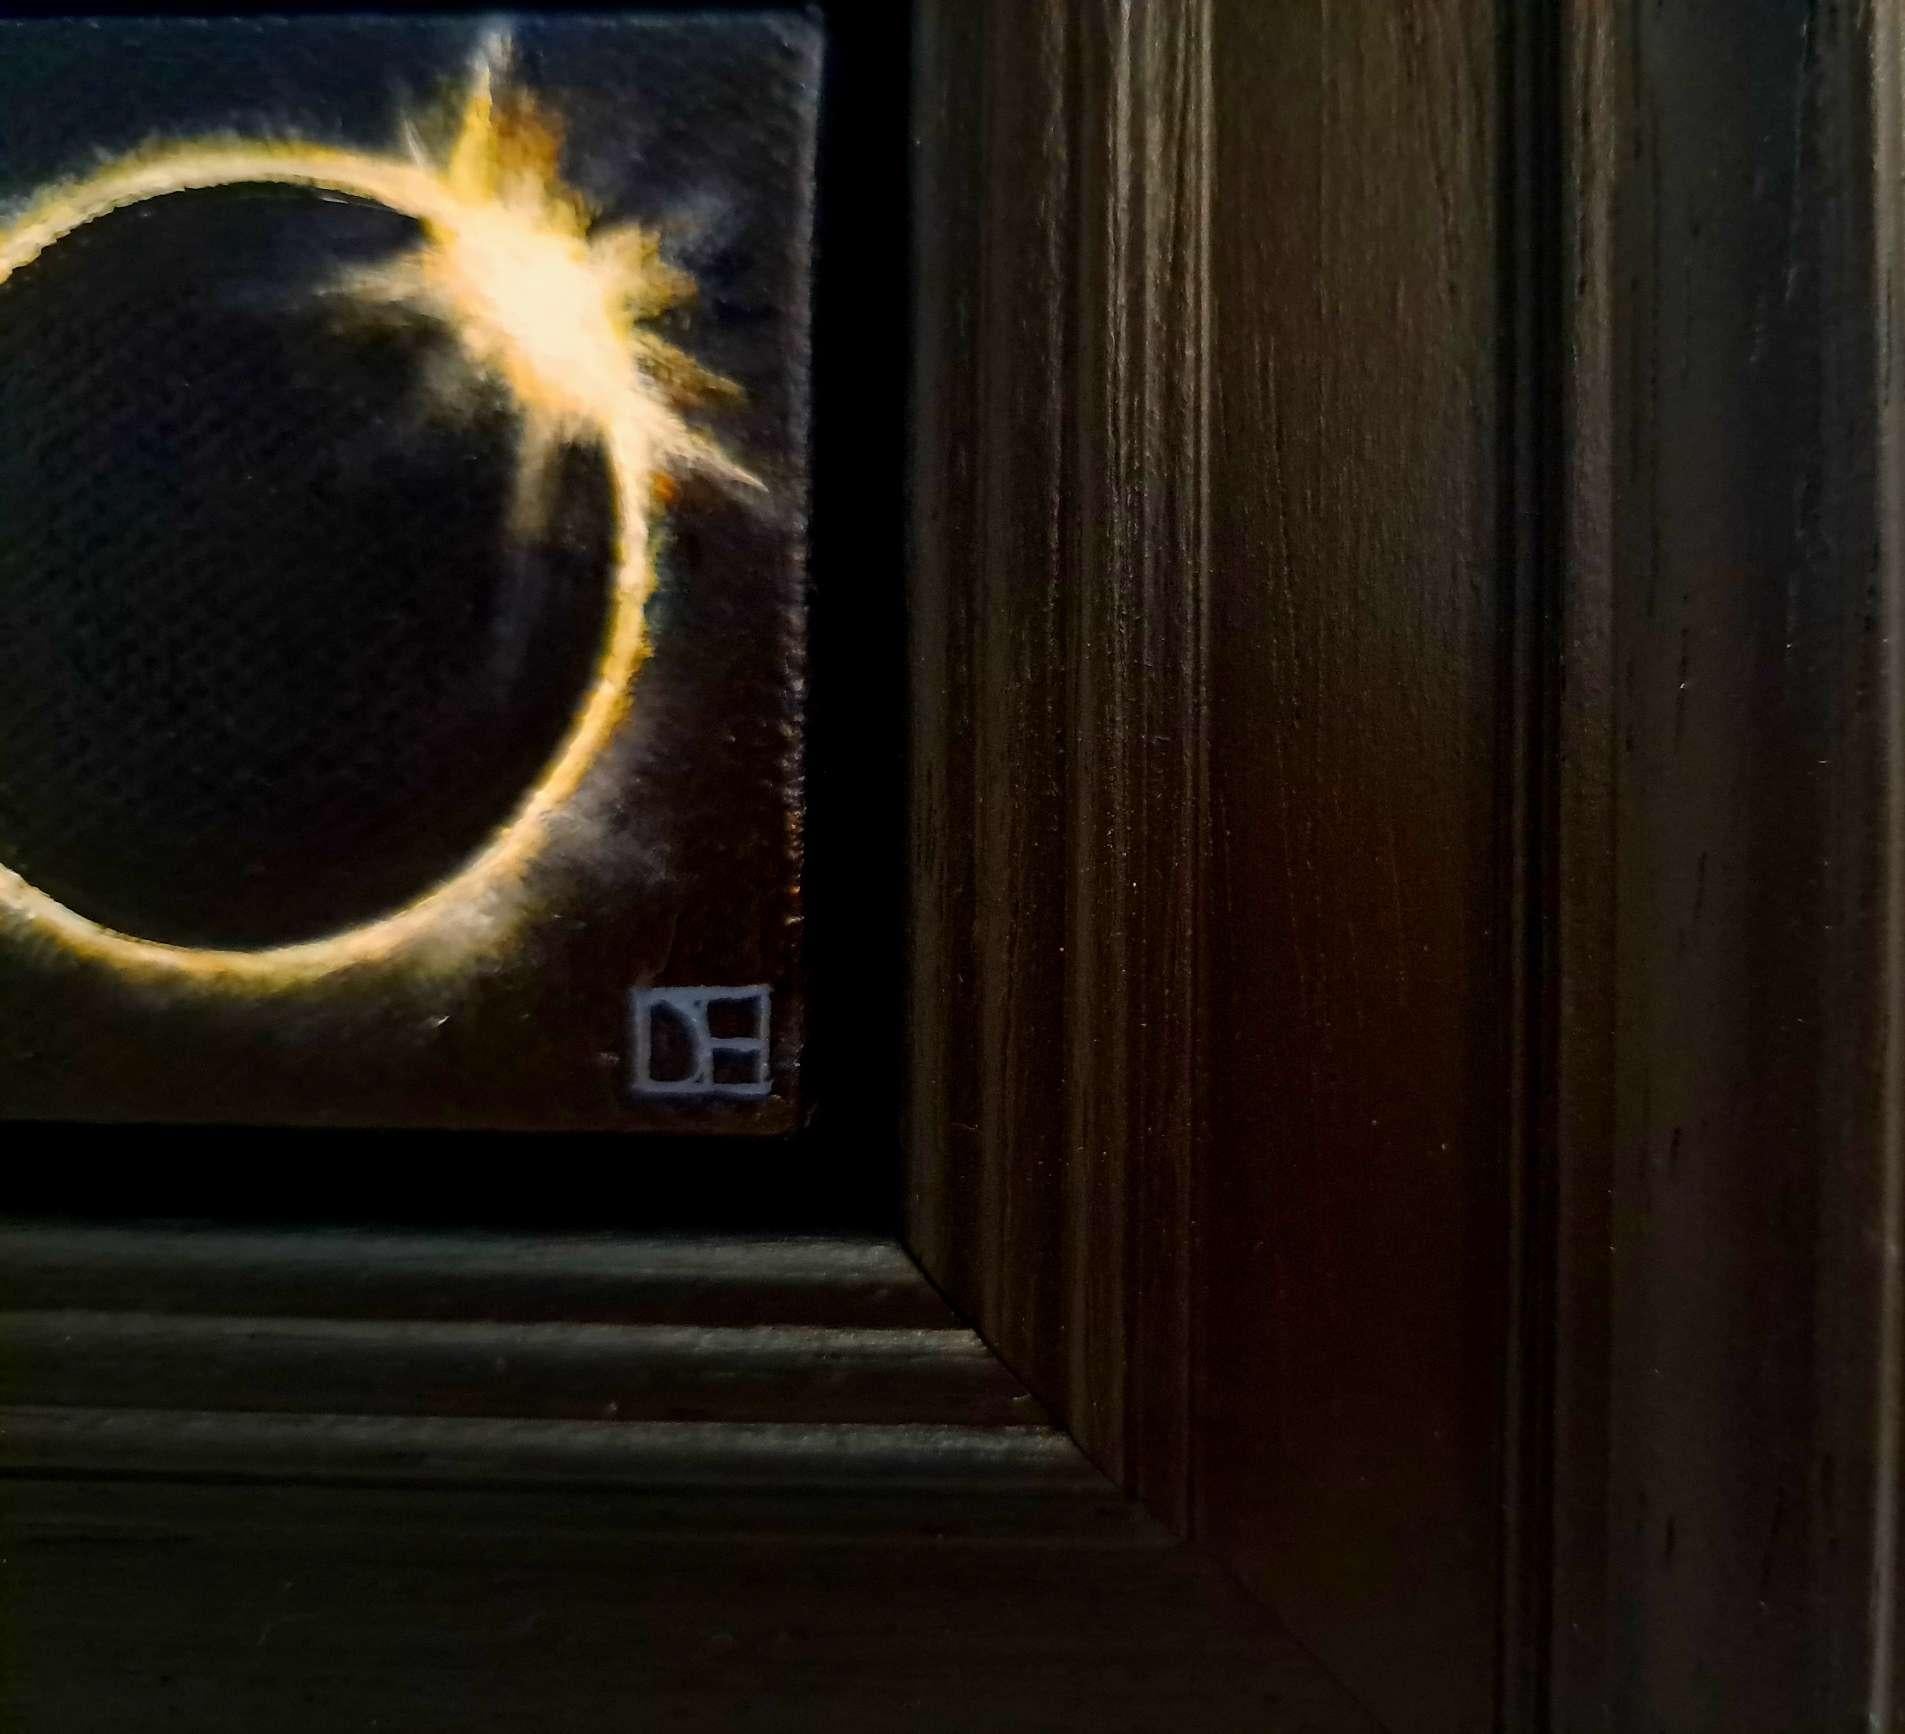 Pocket Sun Eclipse 2024 3 is an original oil painting by Dani Humberstone as part of her Pocket Painting series featuring small scale realistic oil paintings, with a nod to baroque still life painting. The paintings are set in a black wood layered